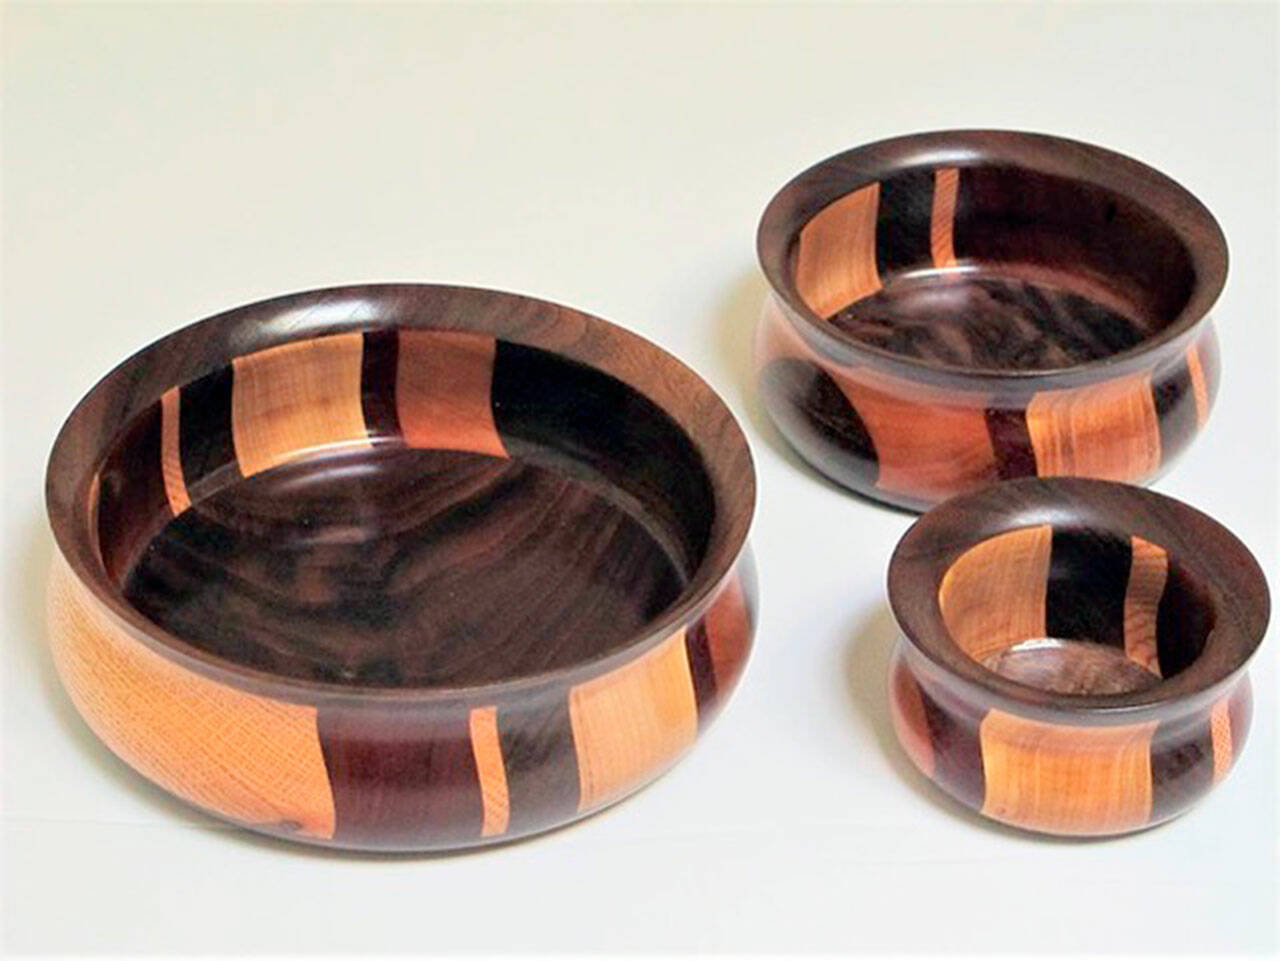 Jon Geisbush’s bowls are featured at Gallery 9.